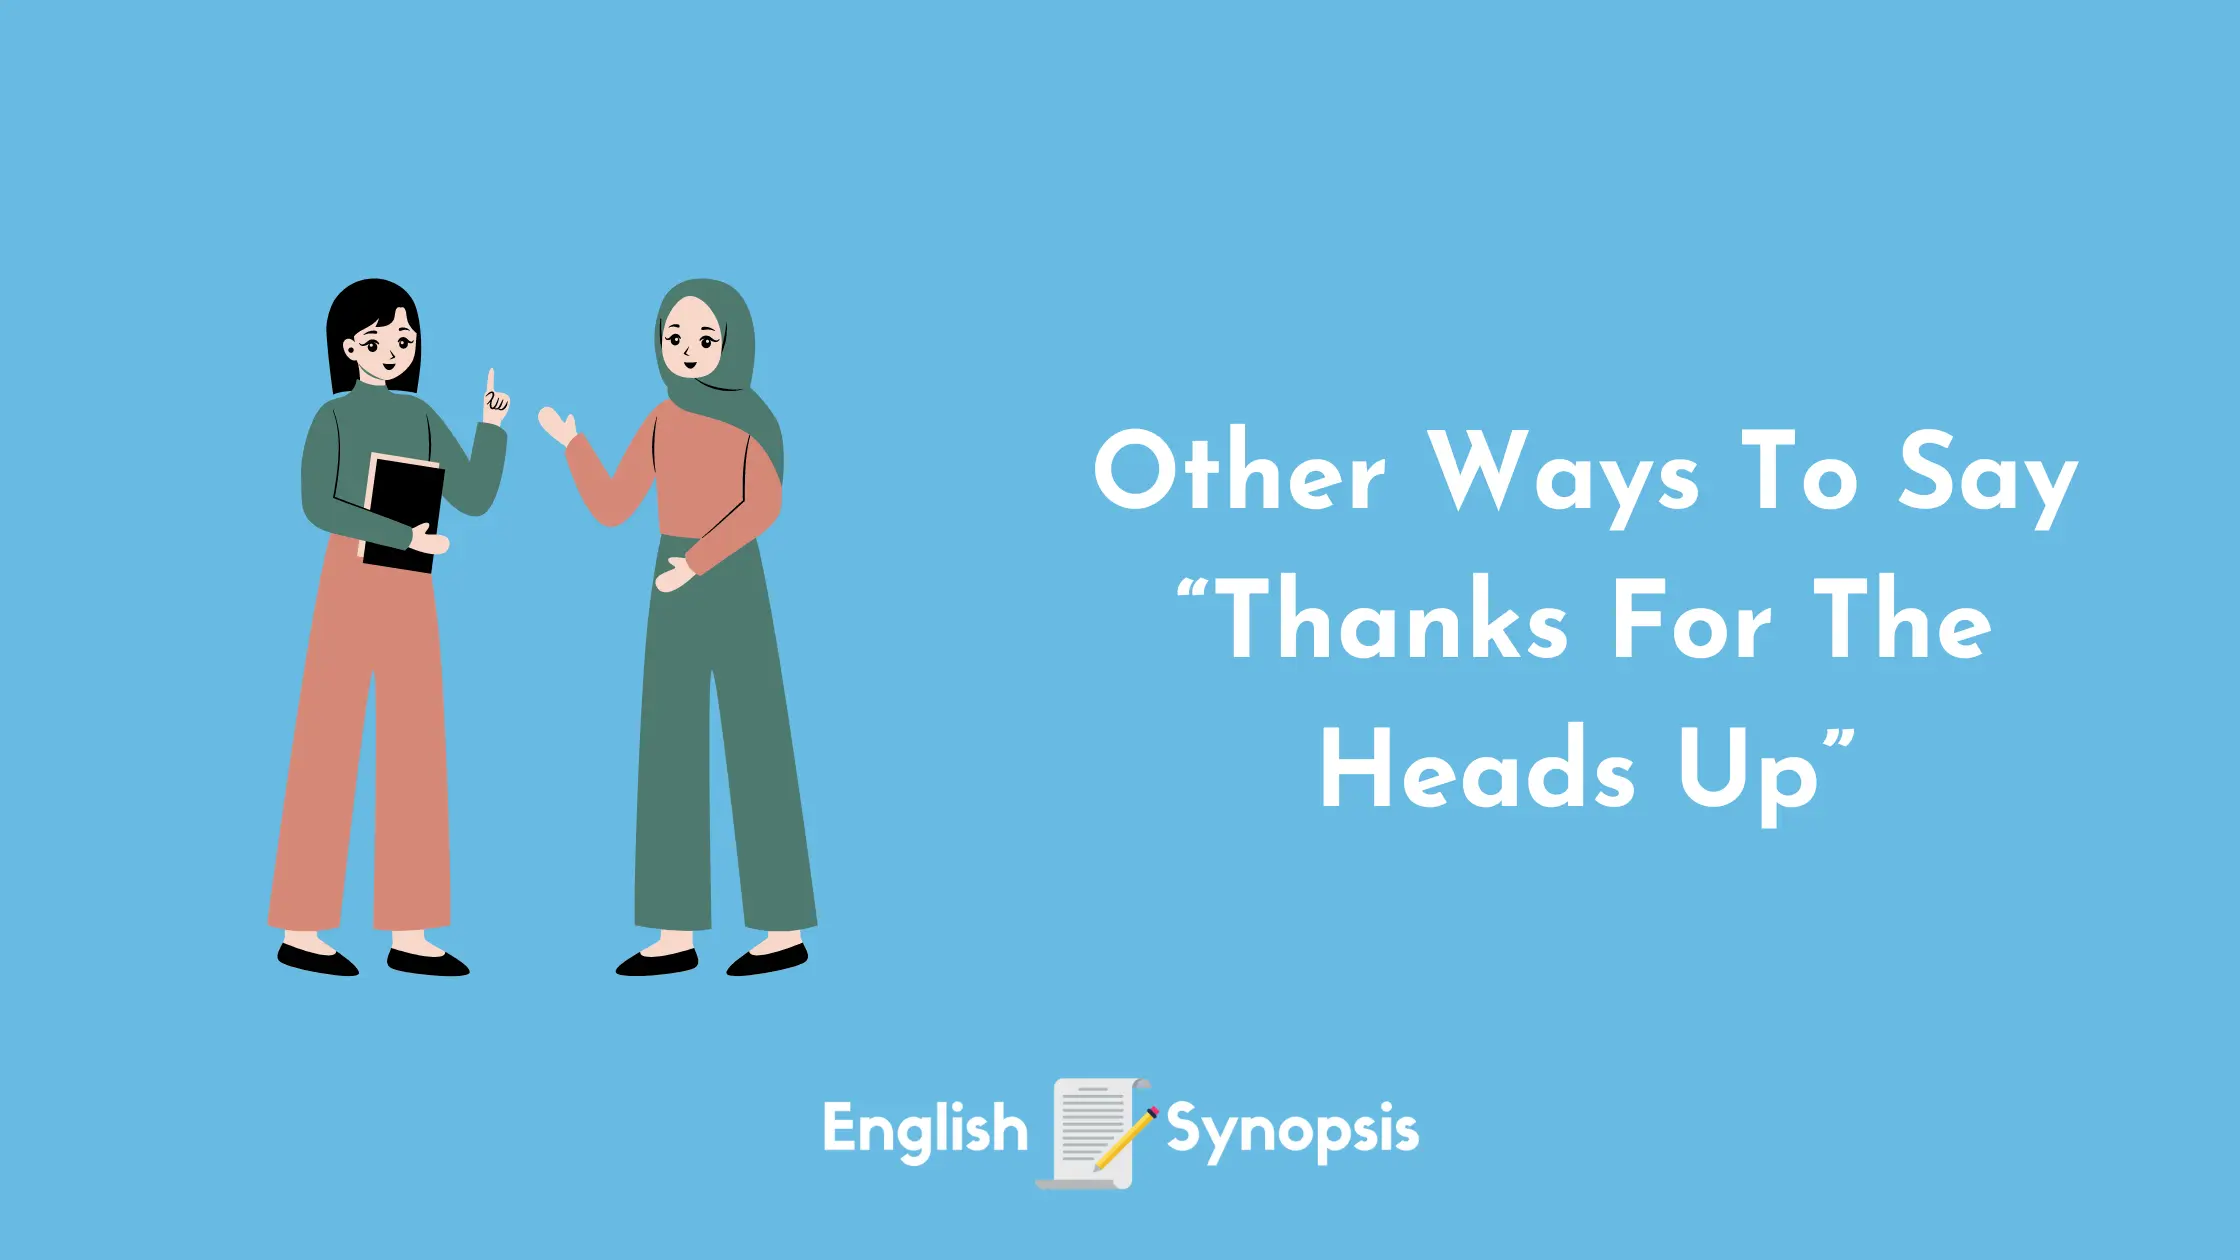 Other Ways To Say "Thanks For The Heads Up"